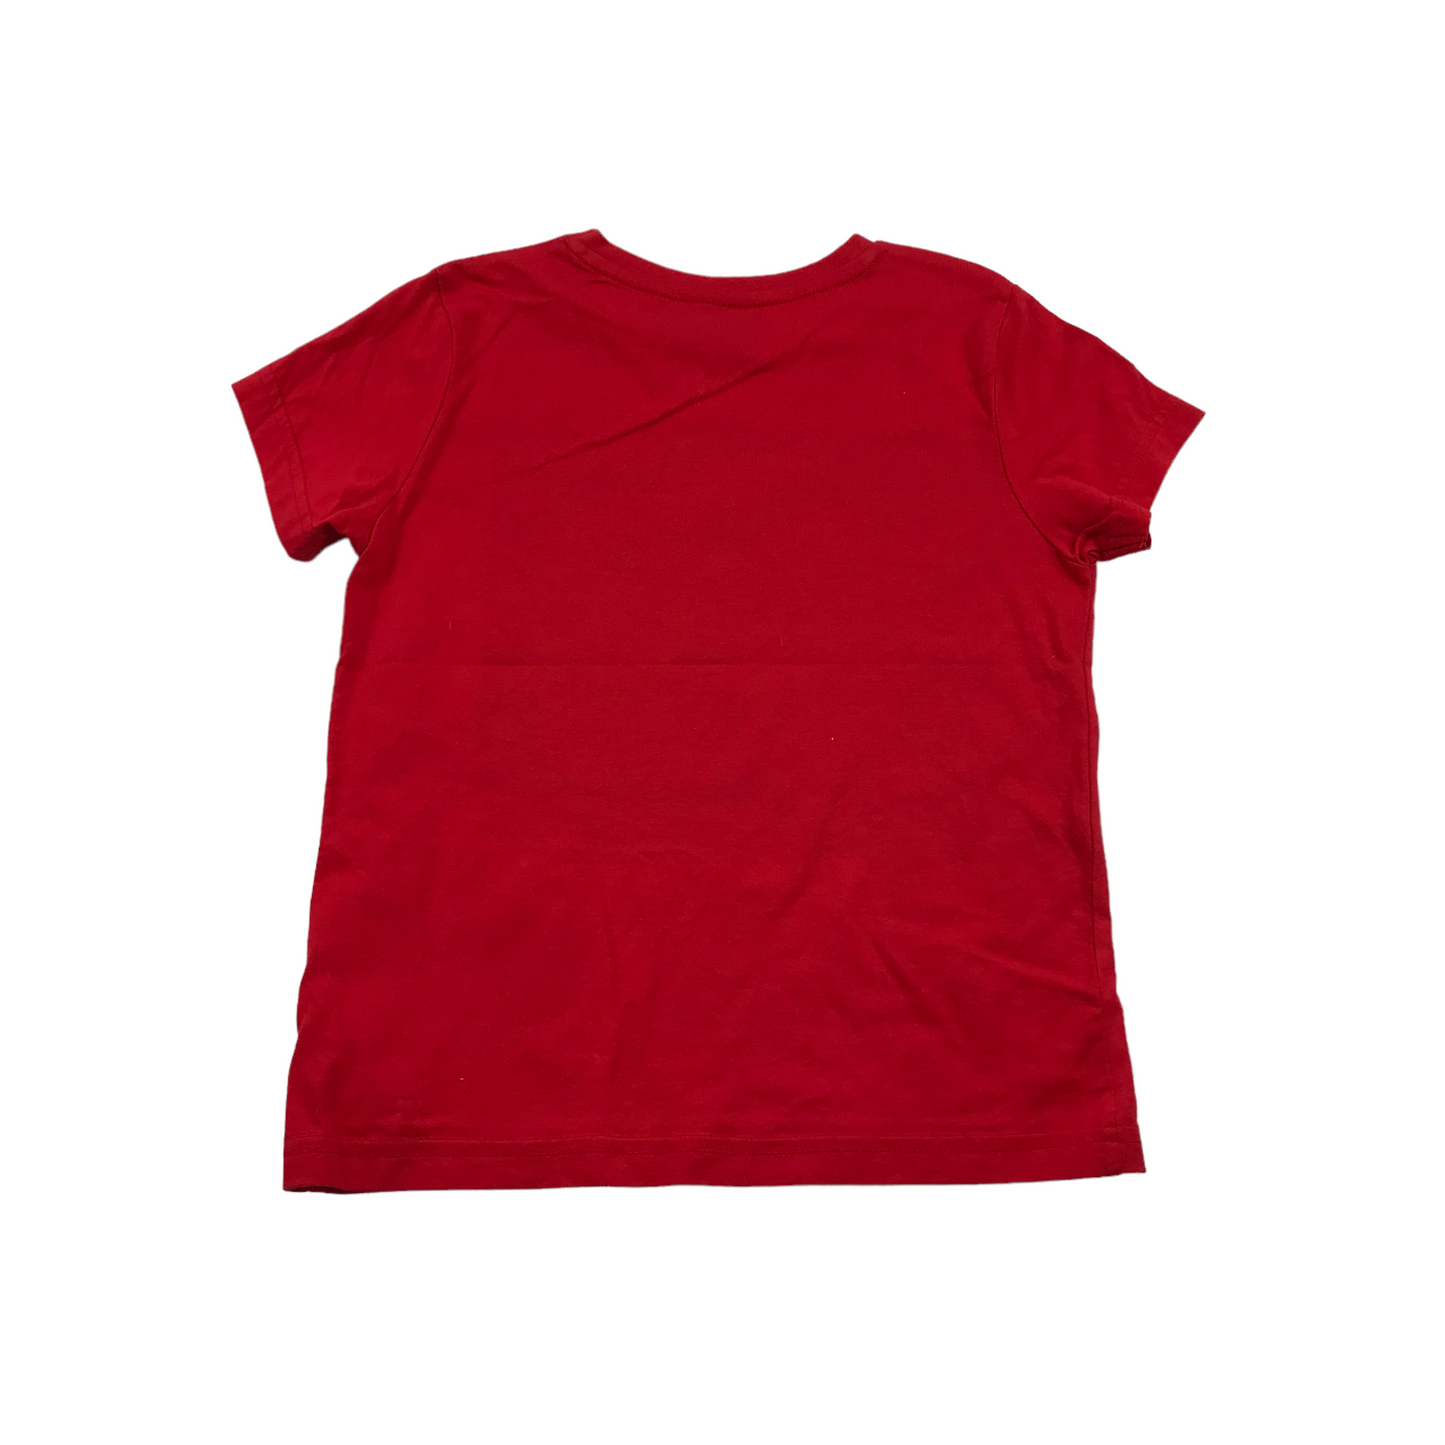 Primark Red Harry Potter Sequin T-shirt Age 4